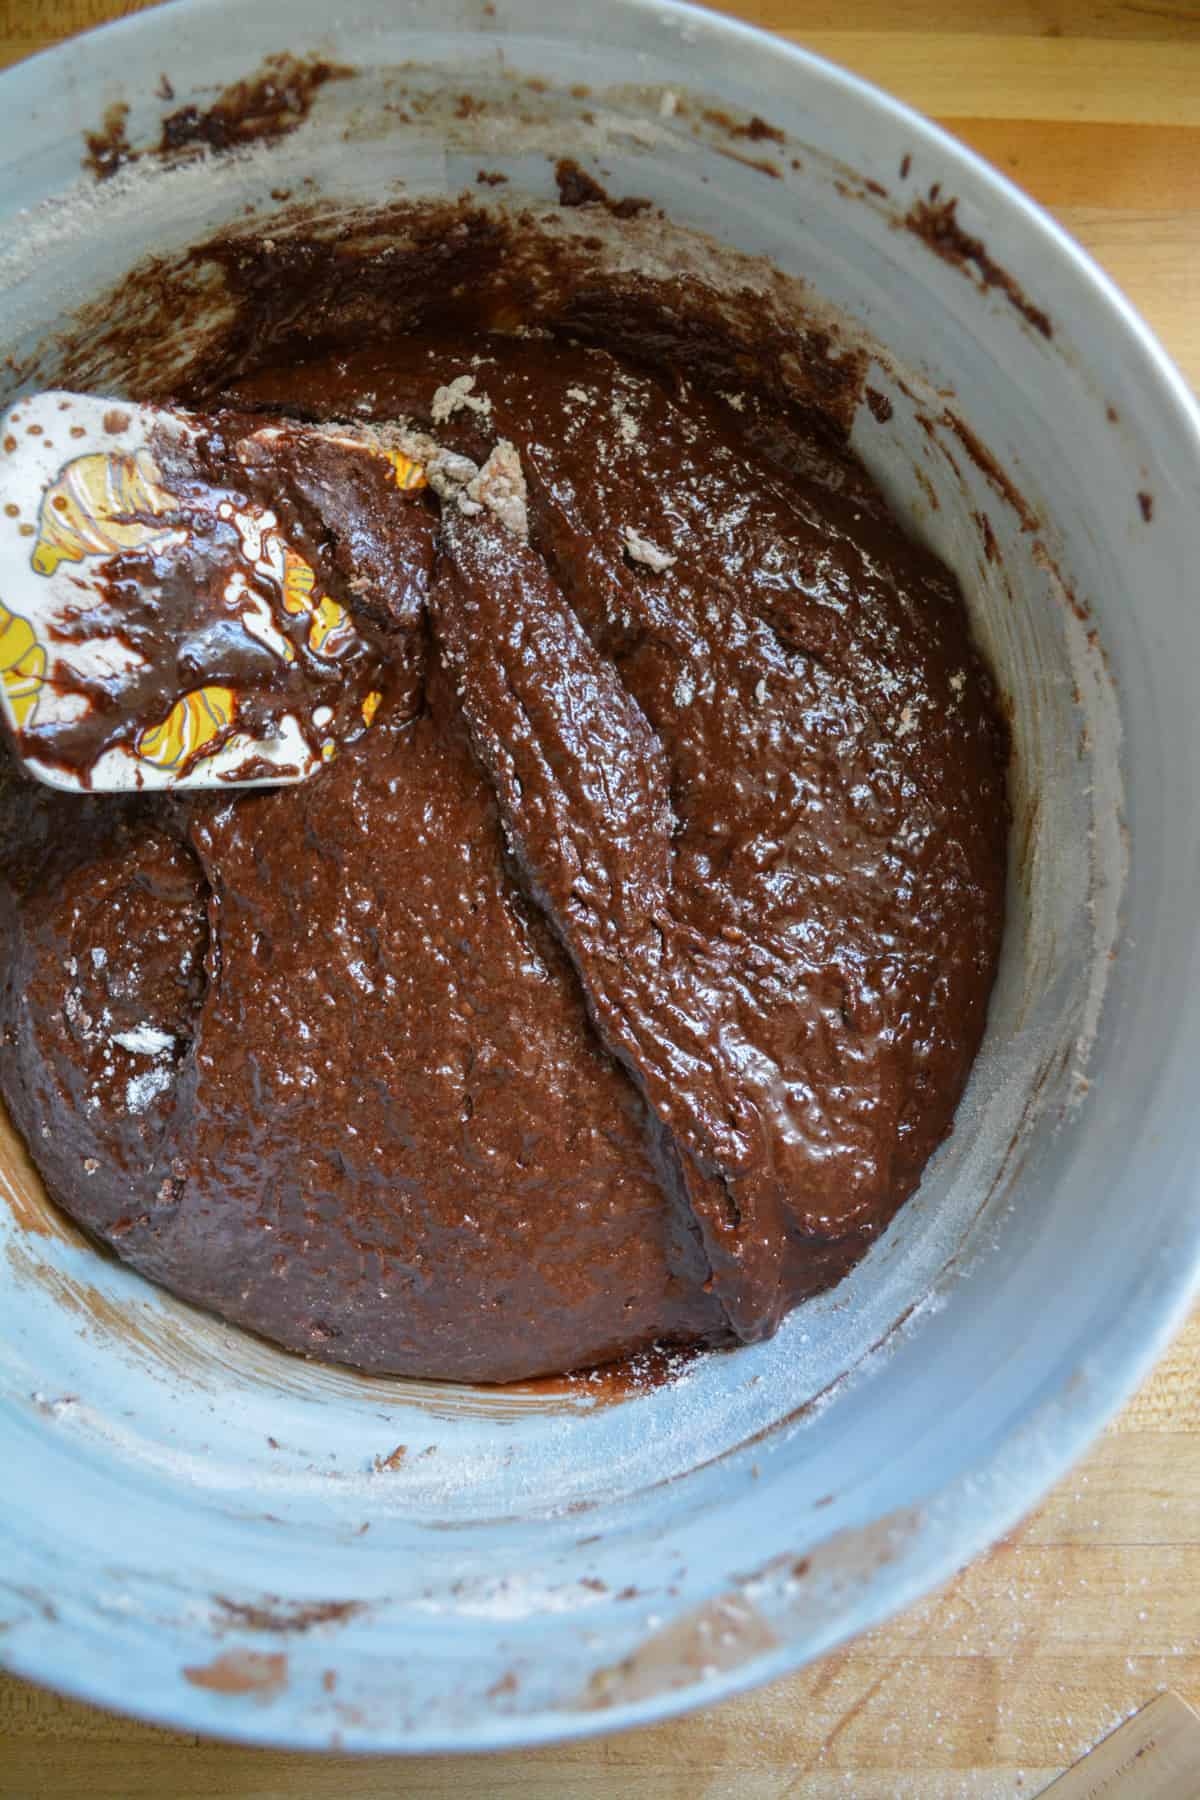 Finished dairy free brownie batter in a mixing bowl.